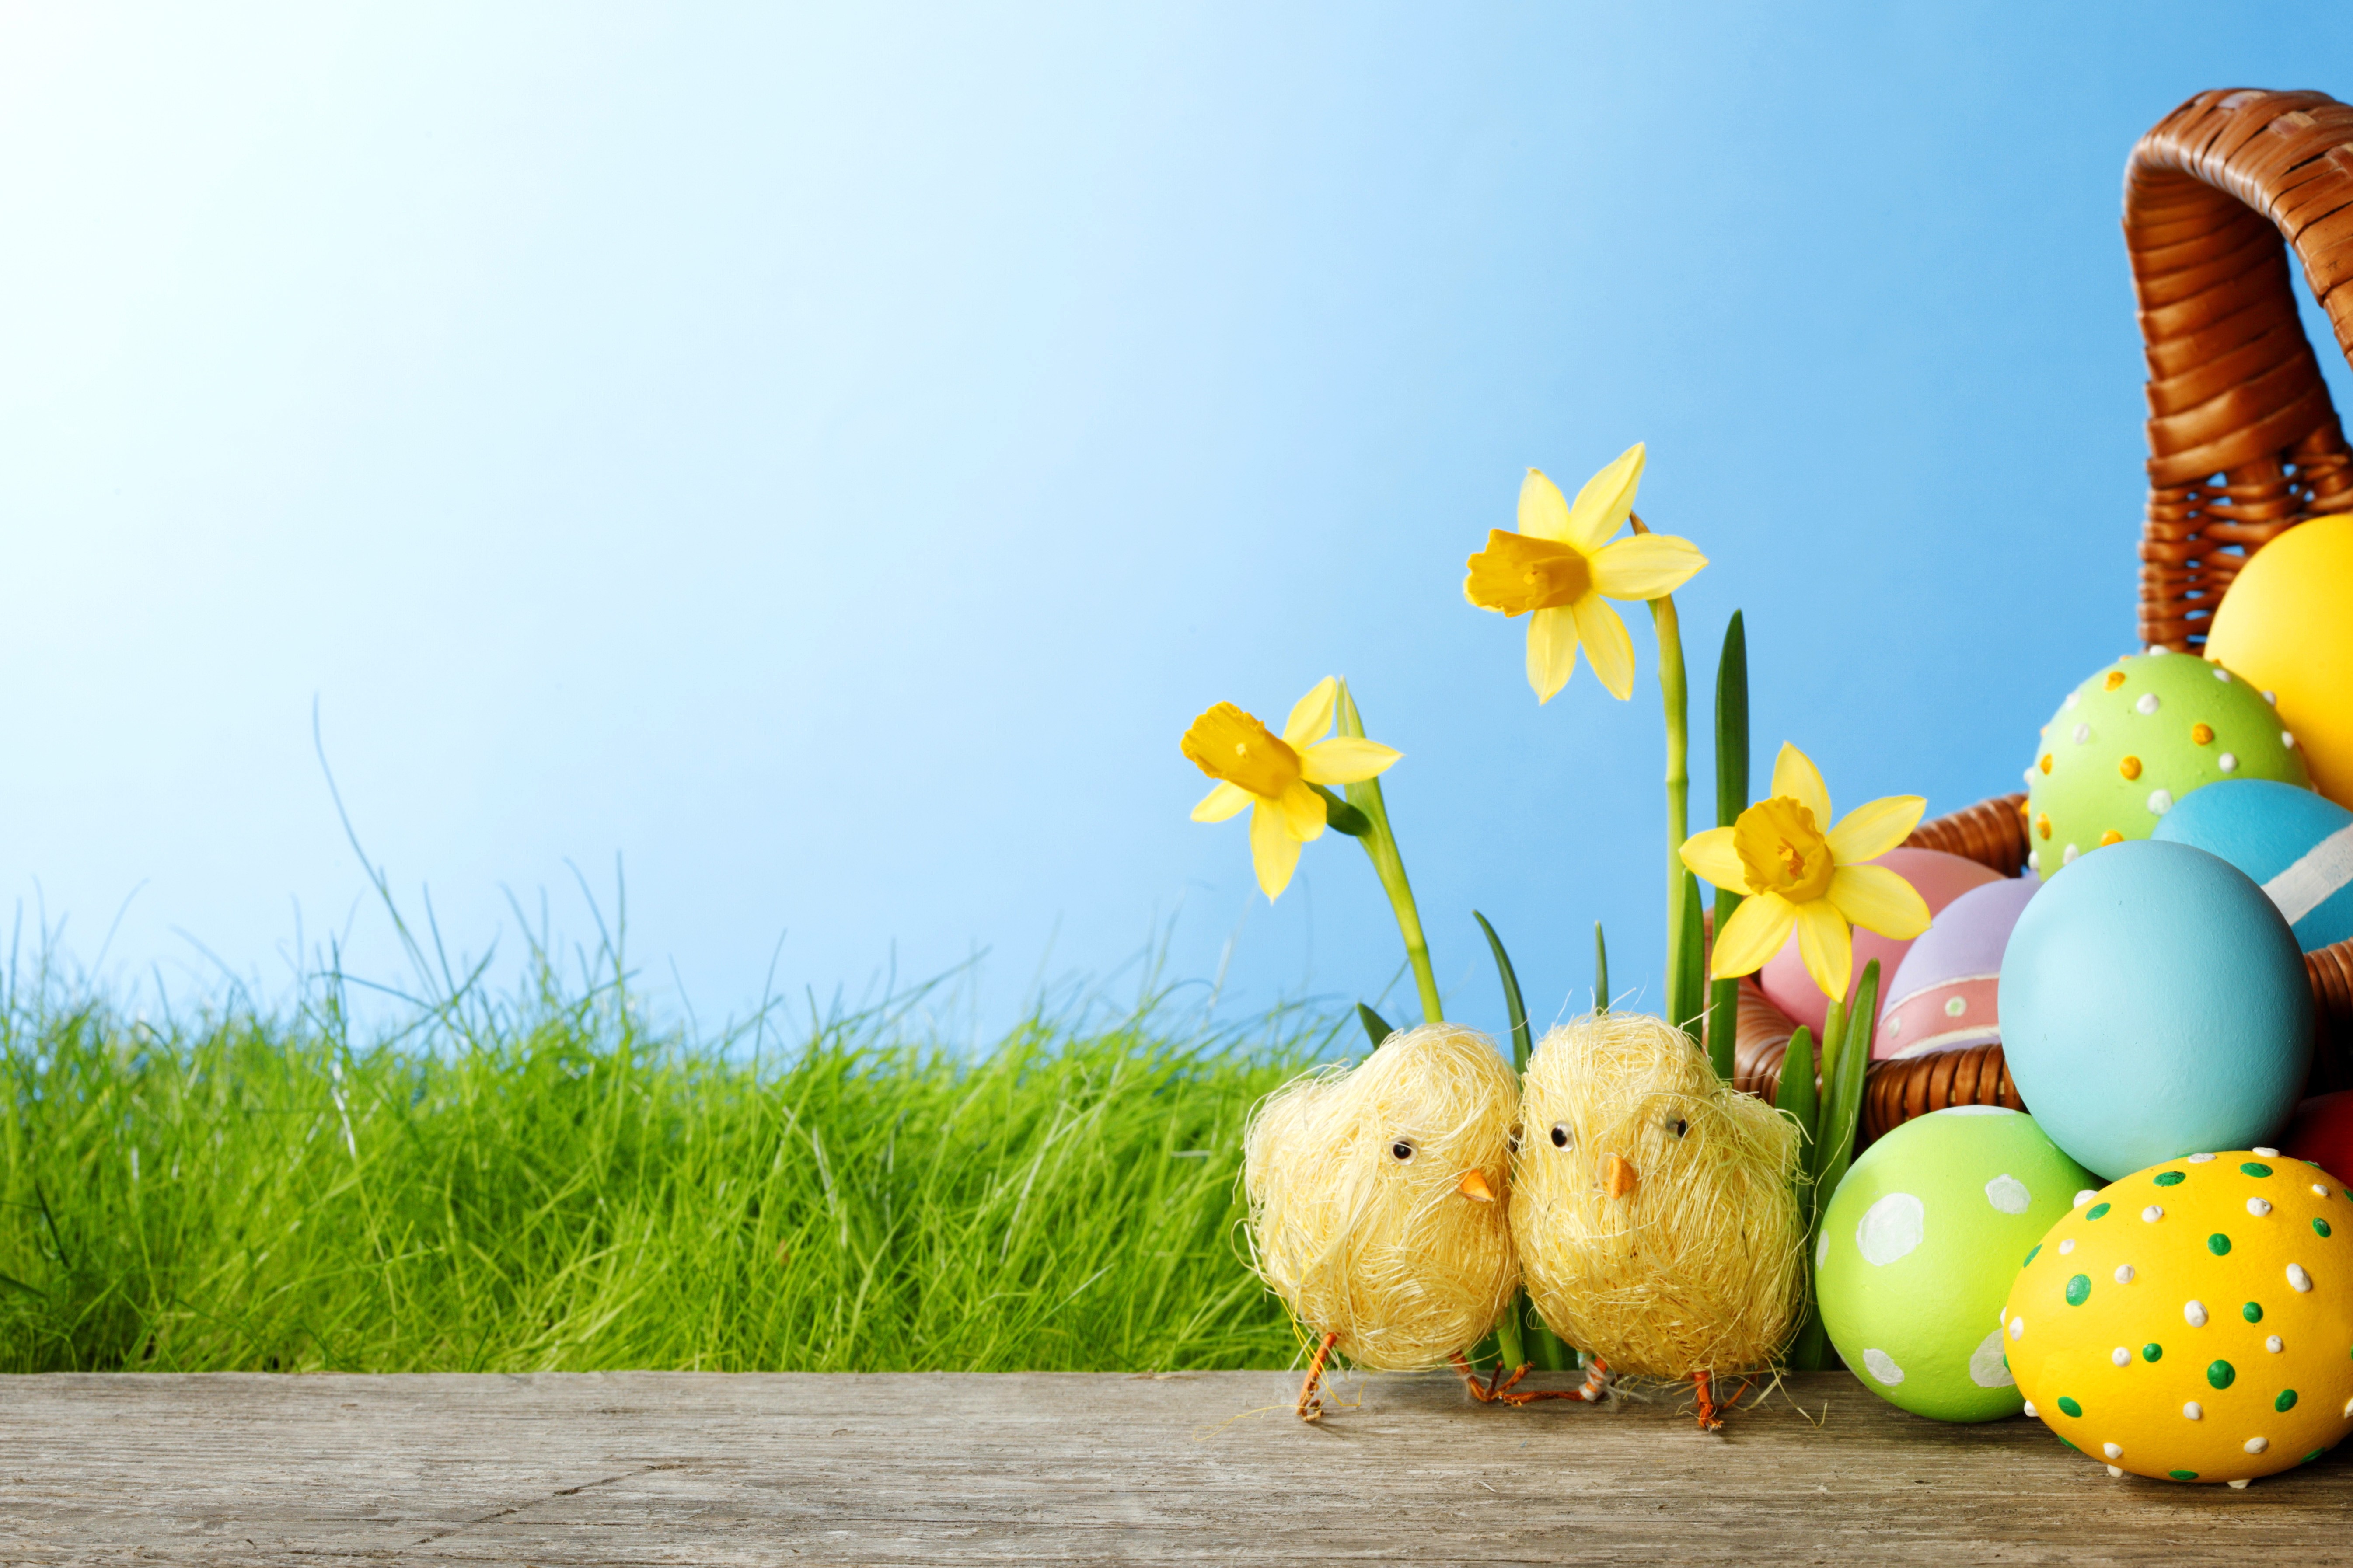 HD Image Of Easter Holiday Desktop Wallpaper Amazing